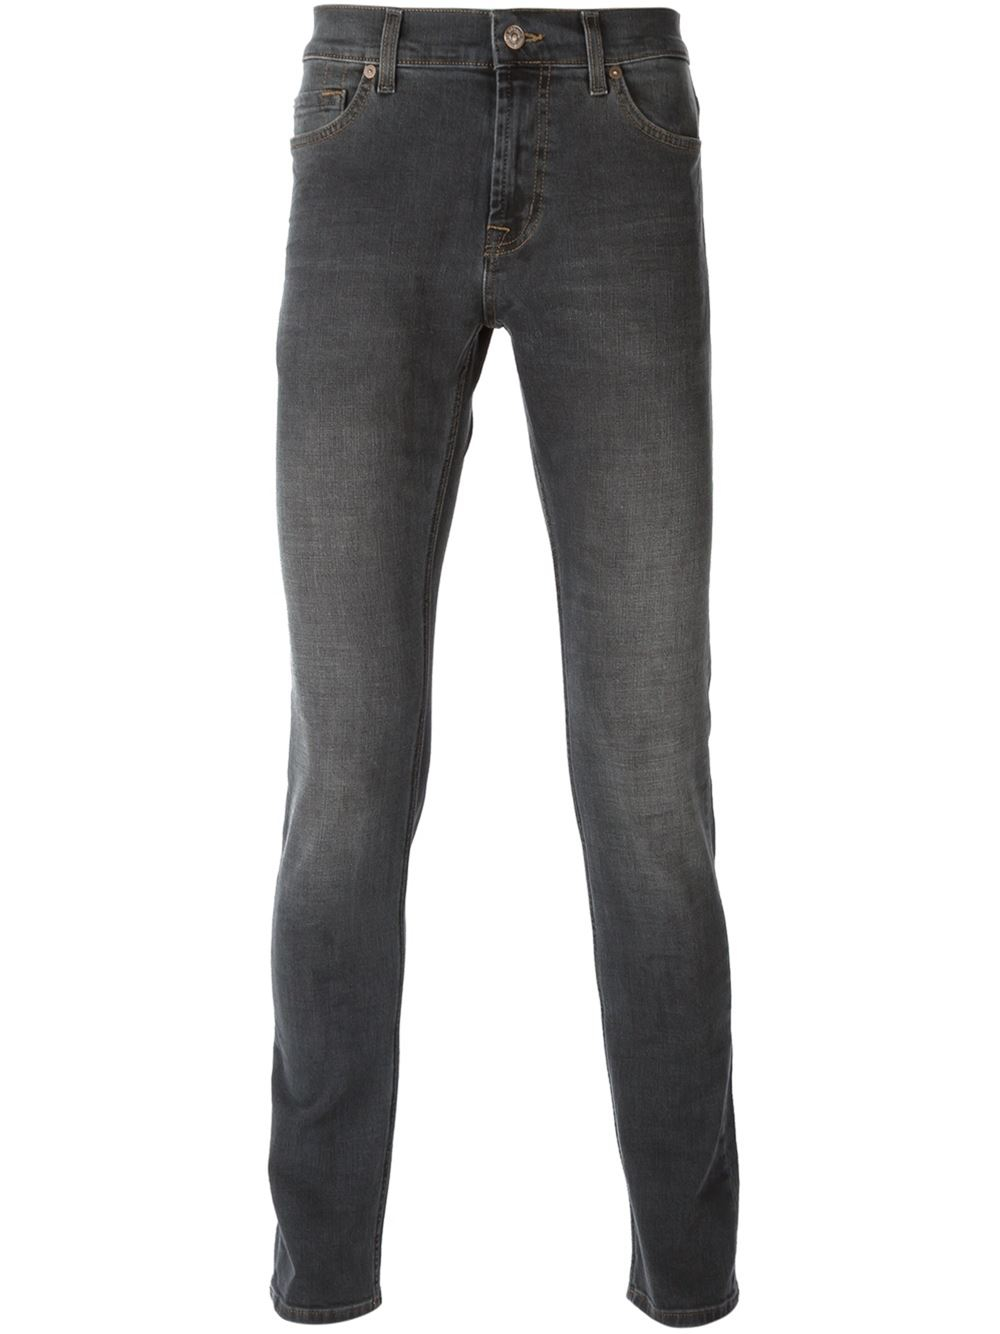 7 for all mankind Stonewashed Skinny Jeans in Black for Men | Lyst